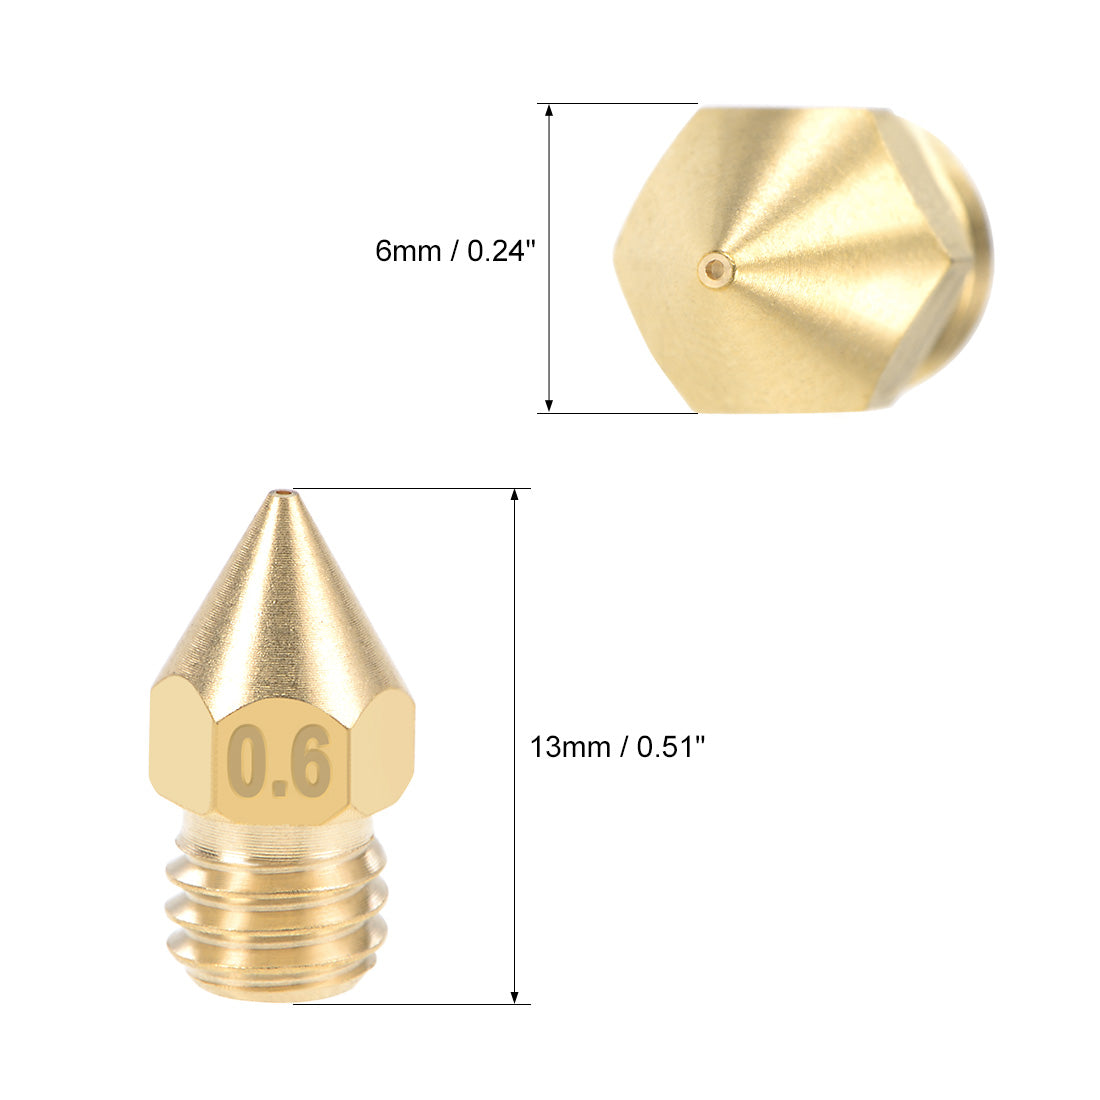 uxcell Uxcell 0.6mm 3D Printer Nozzle Head M6 Thread Replacement for MK8 1.75mm Extruder Print, Brass 10pcs